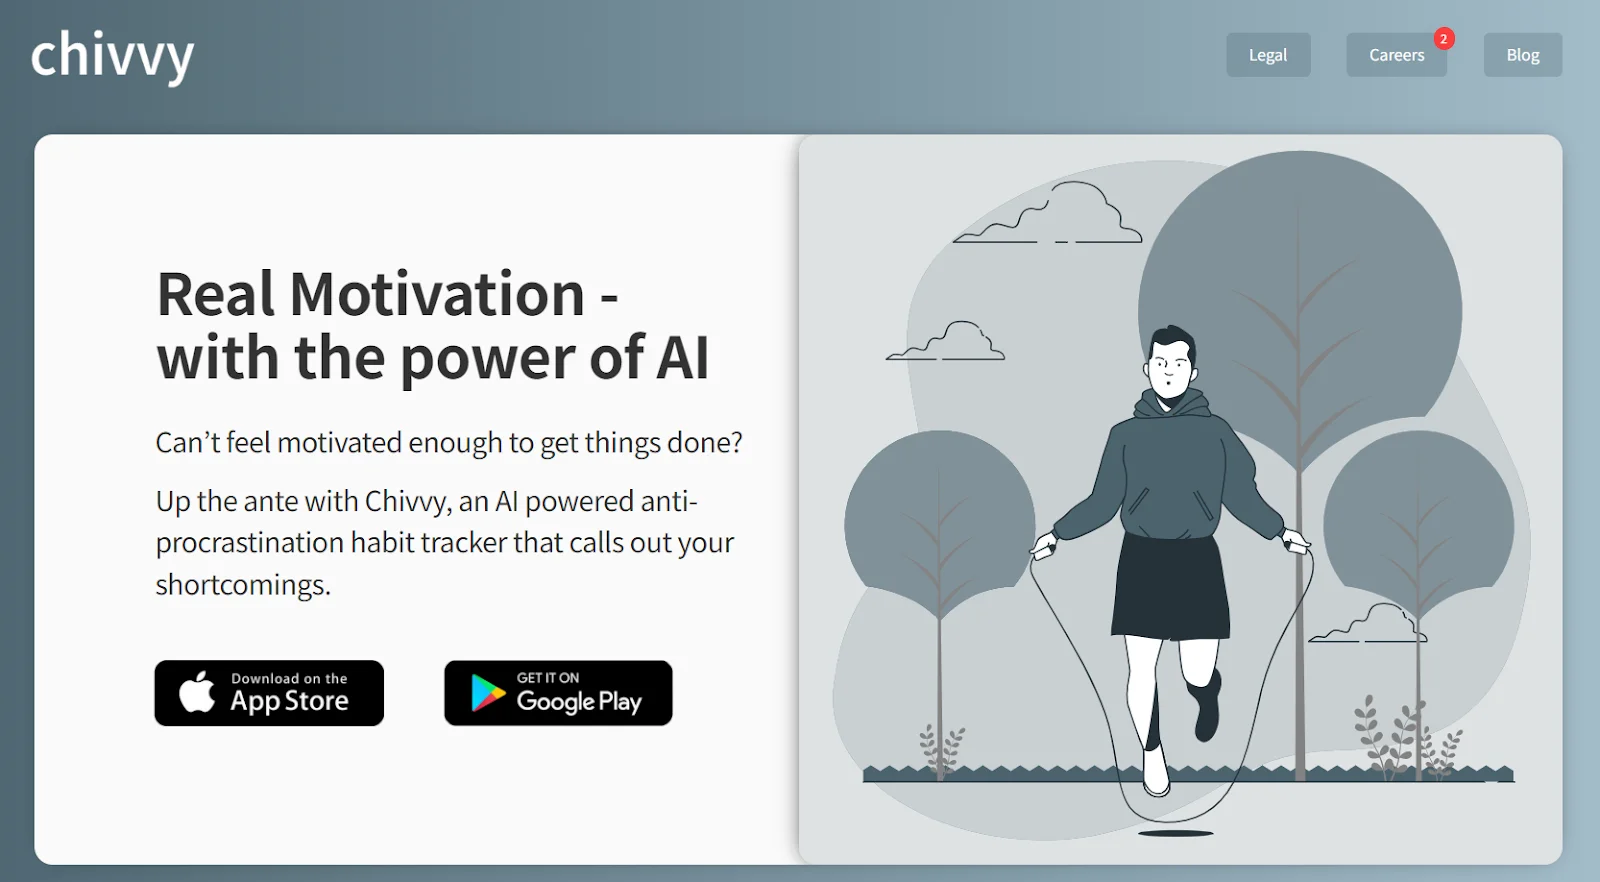 Chivvy Website - Real Motivation - with the power of AI